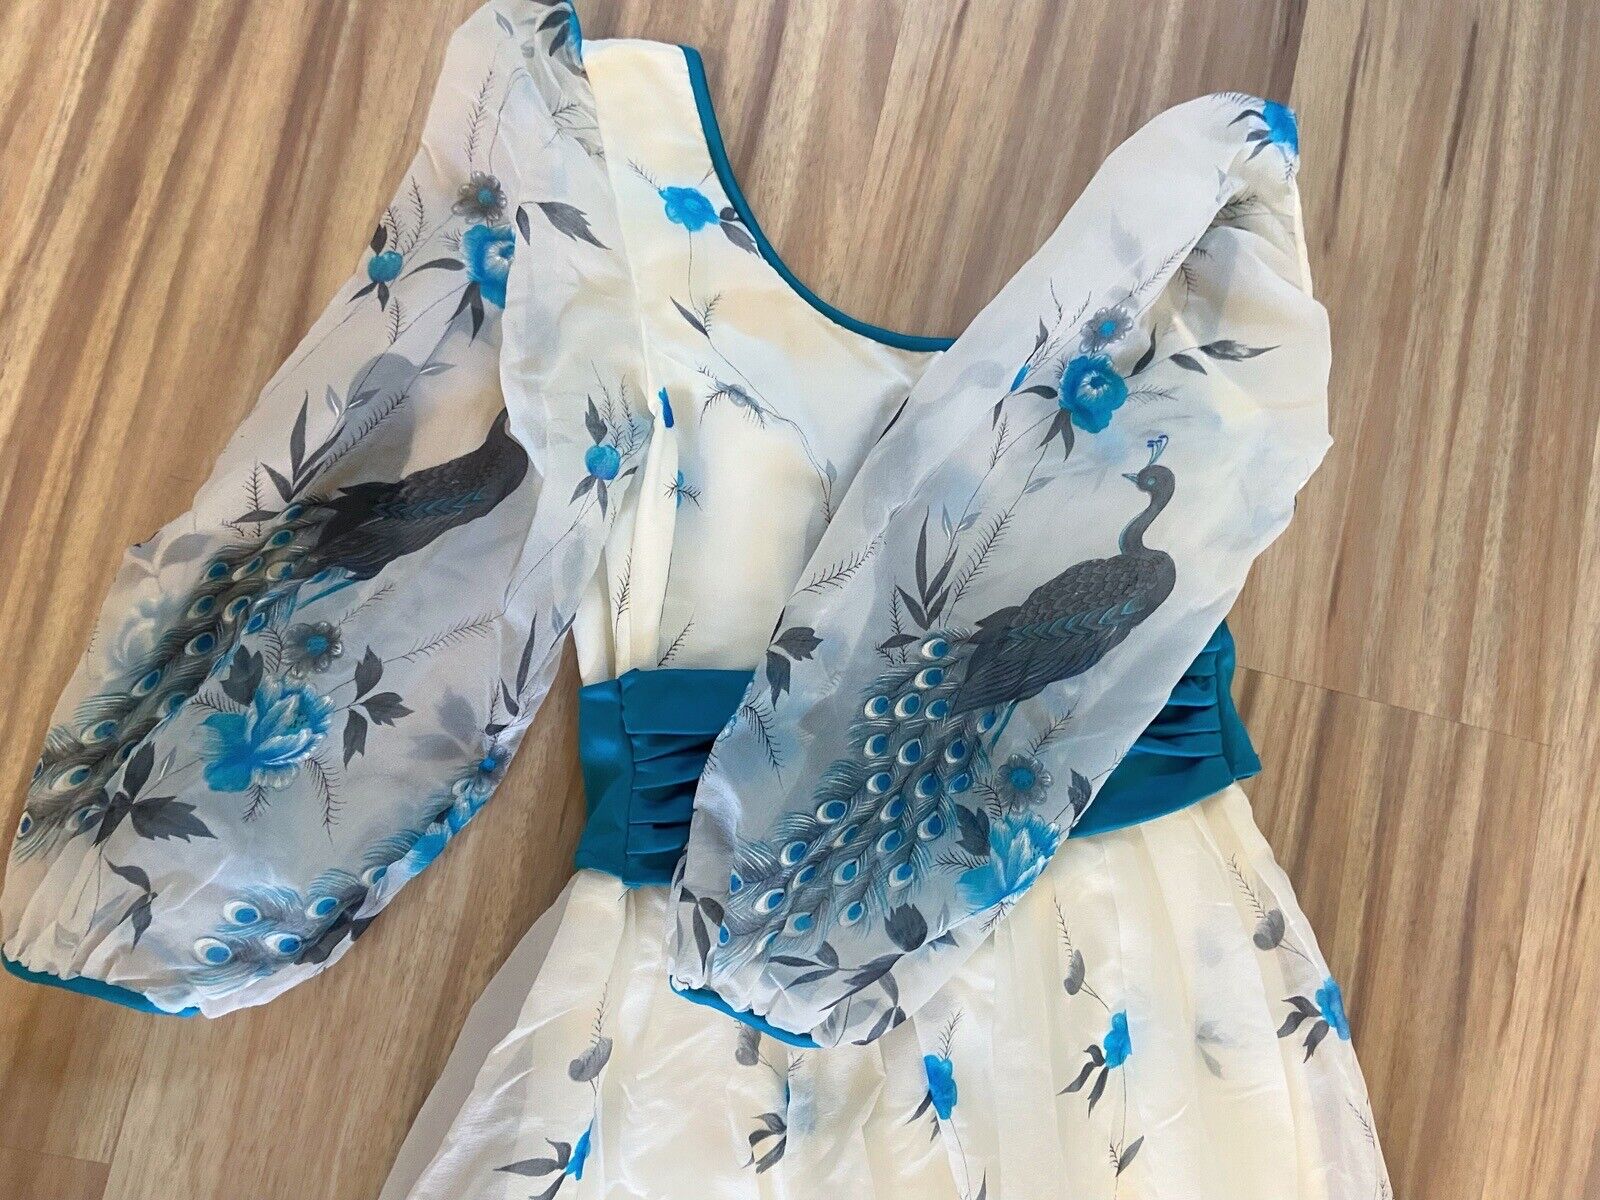 AMAZING One of A Kind Vintage Peacock Wedding Or Occasion Dress White And Teal